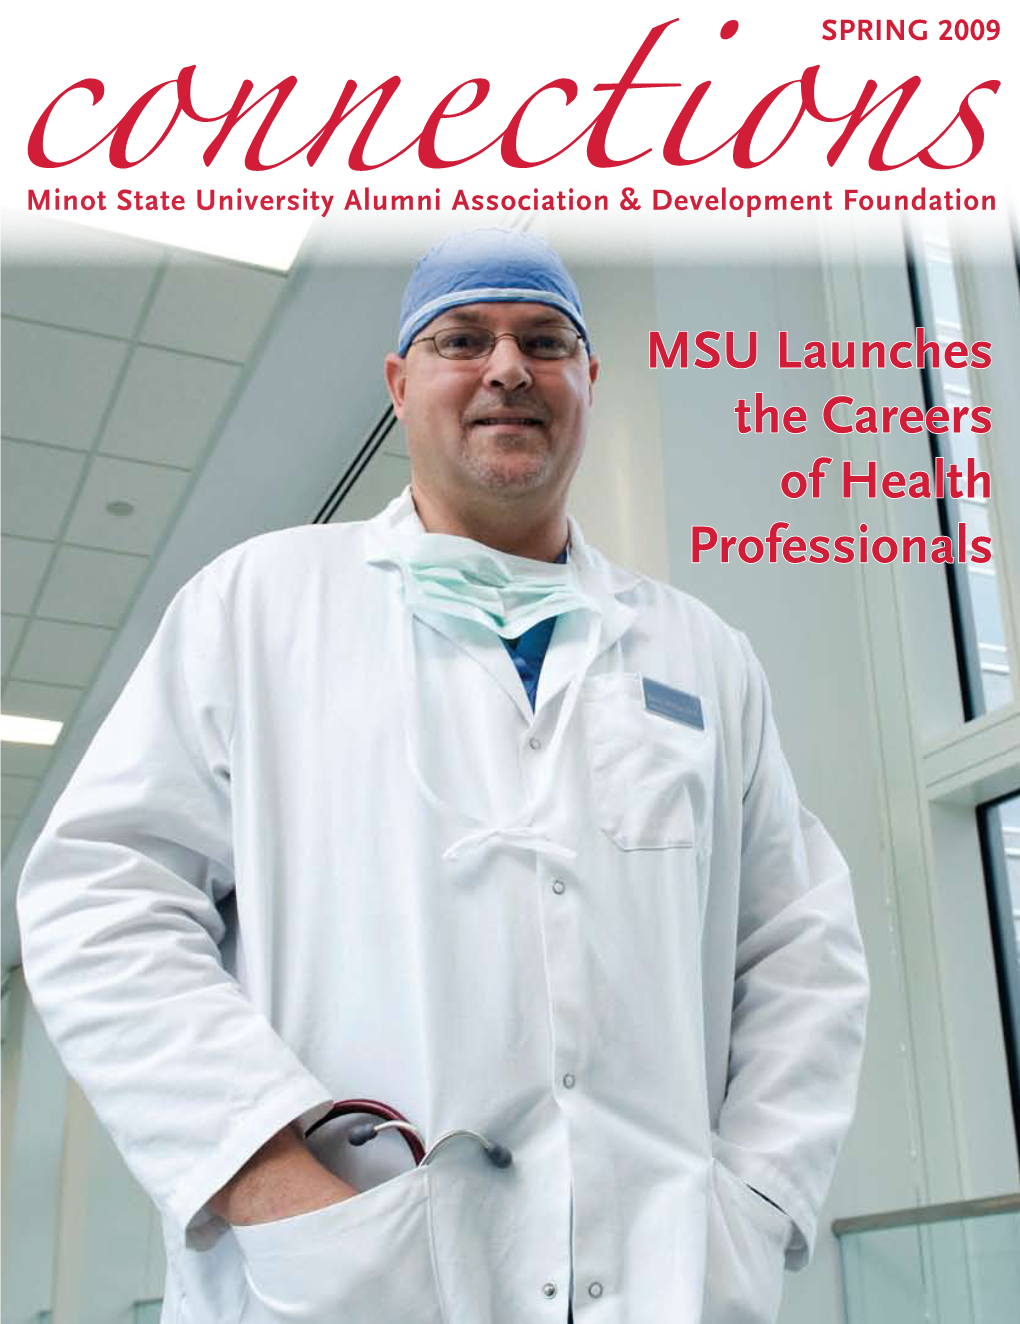 MSU Launches the Careers of Health Professionals President’S Welcome